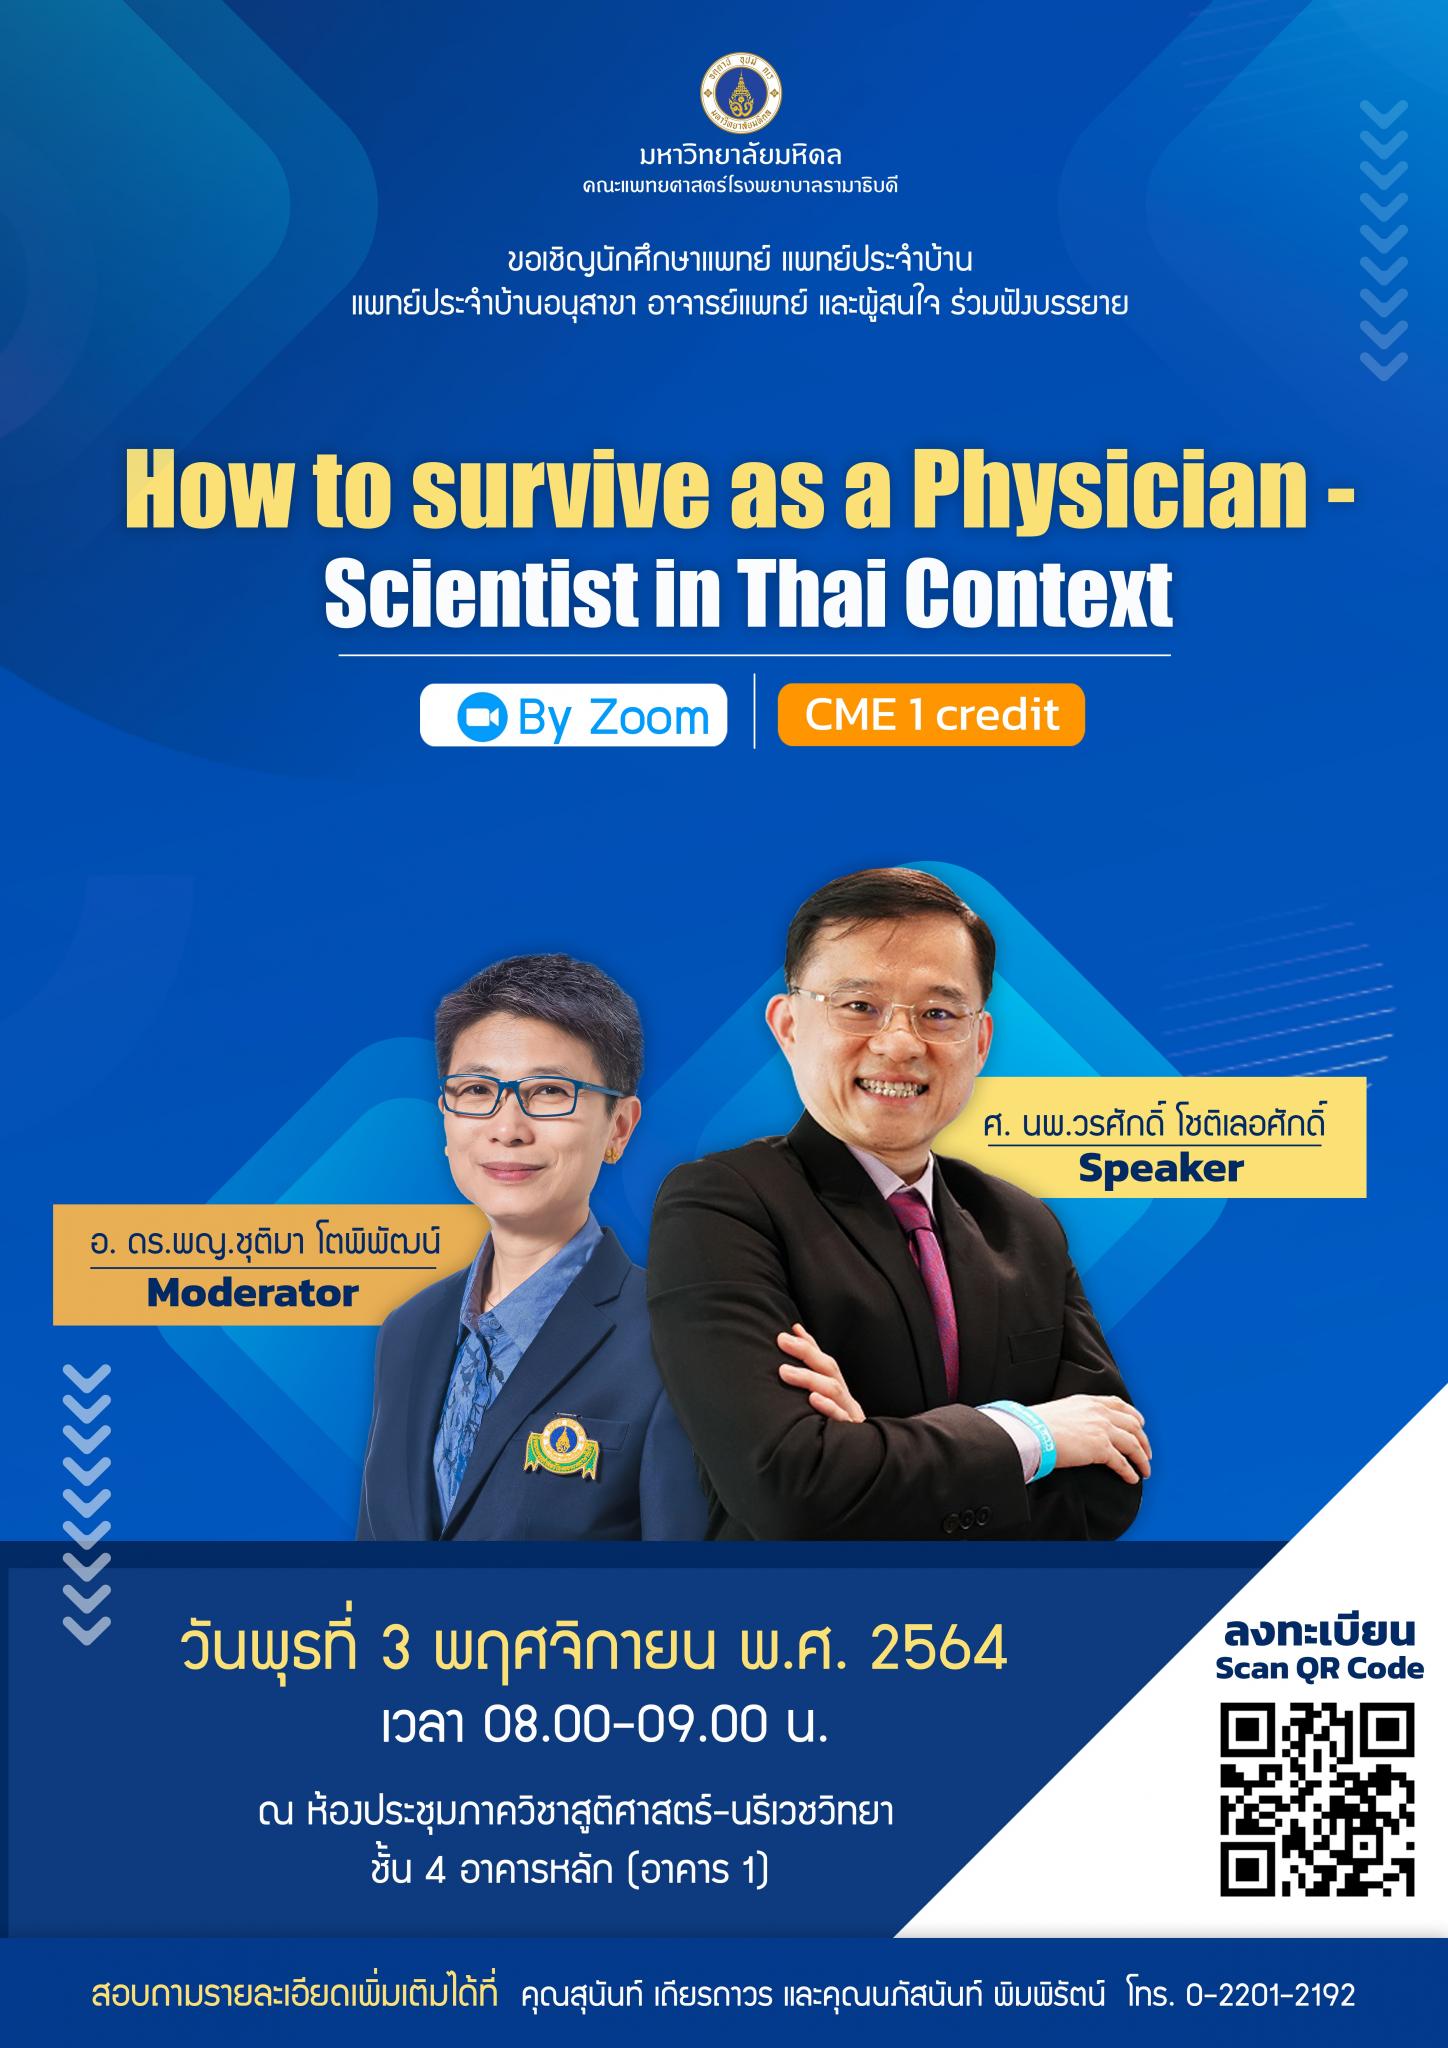 How to survive as a Physician-Scientist in Thai Context